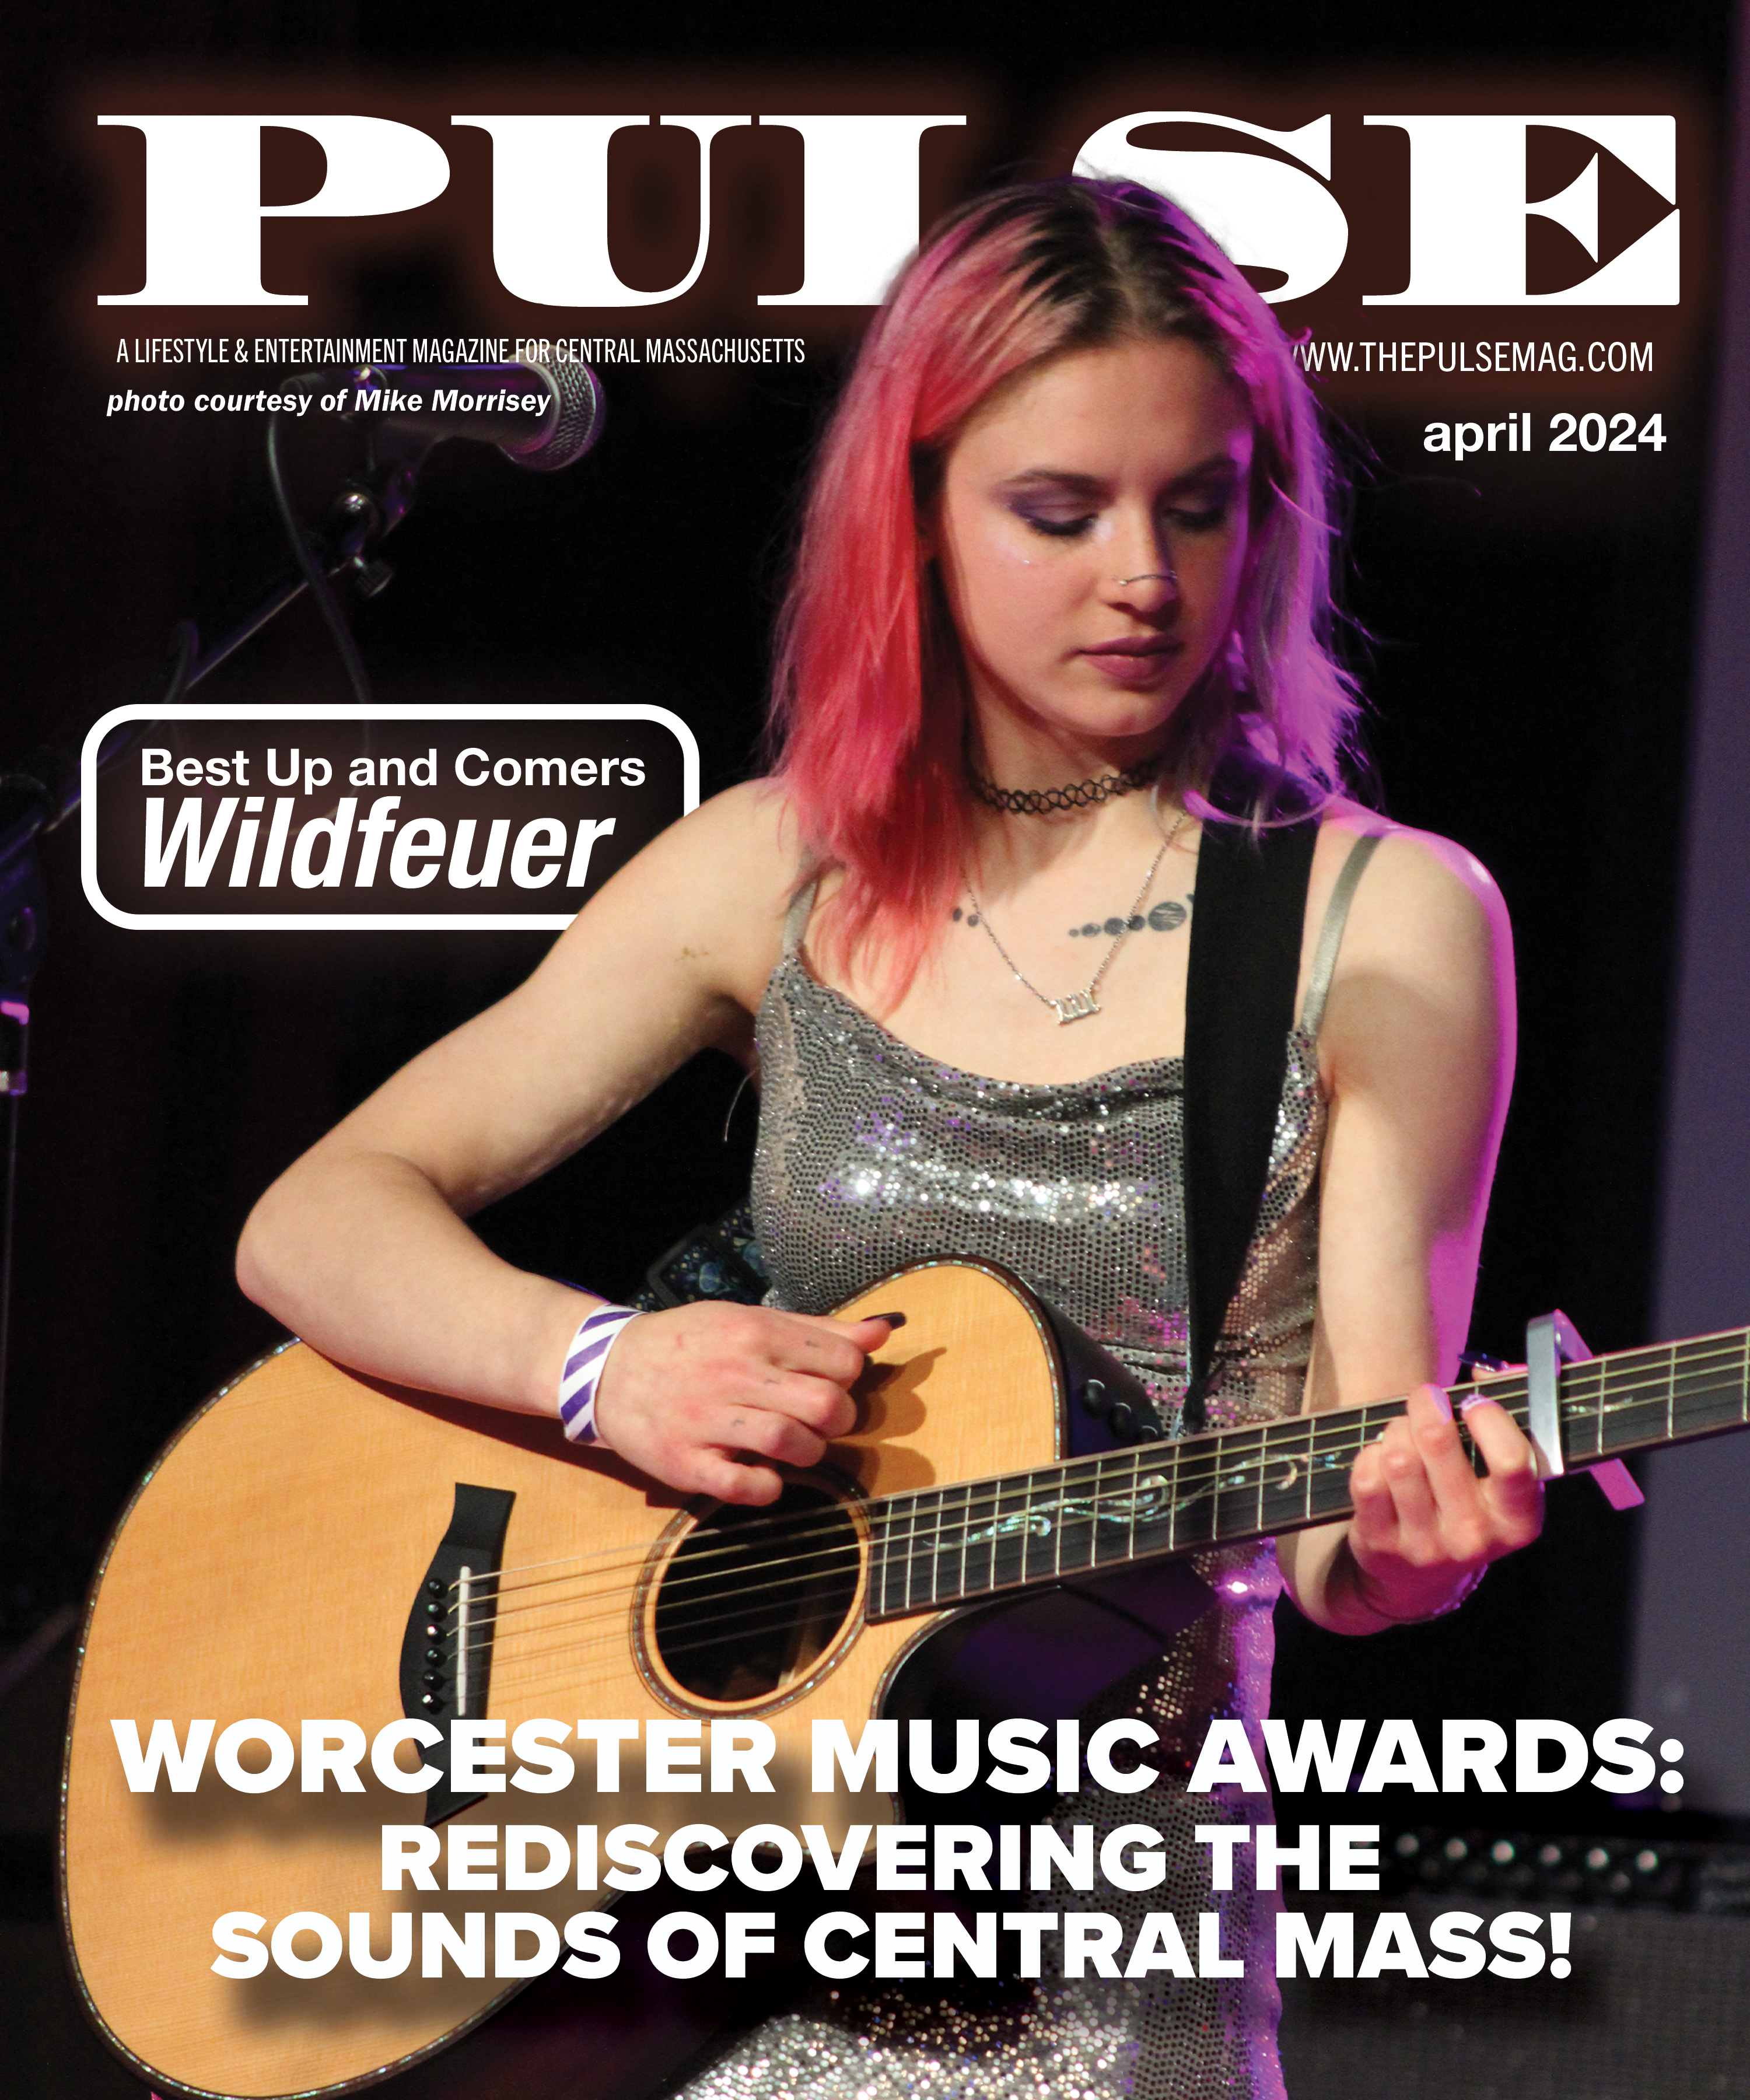 Worcester Music Awards: Rediscovering the Sounds of Central Mass!